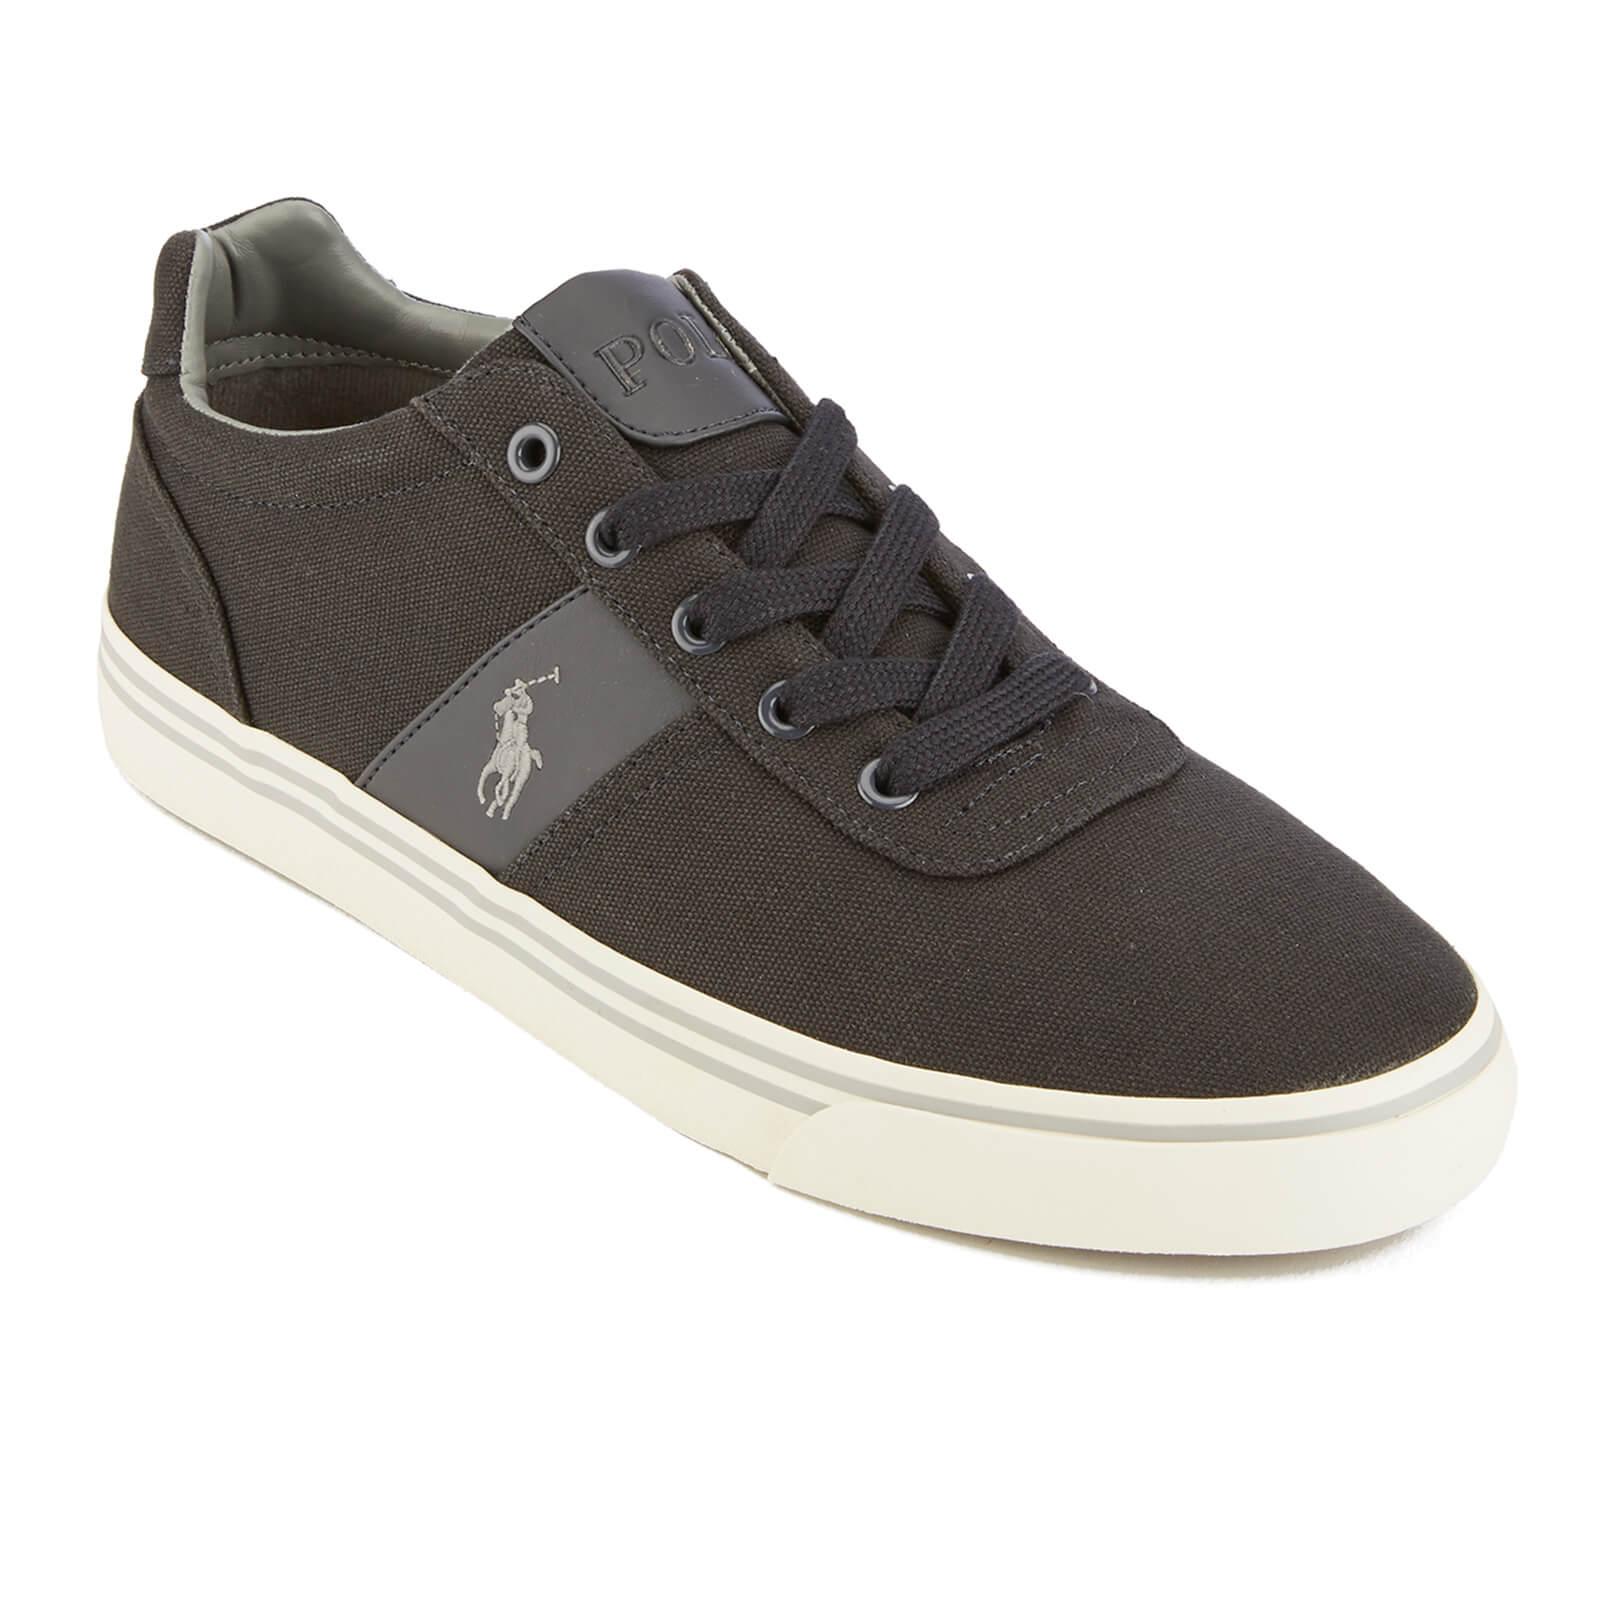 Polo Ralph Lauren Hanford Canvas Trainers in Grey (Gray) for Men - Lyst